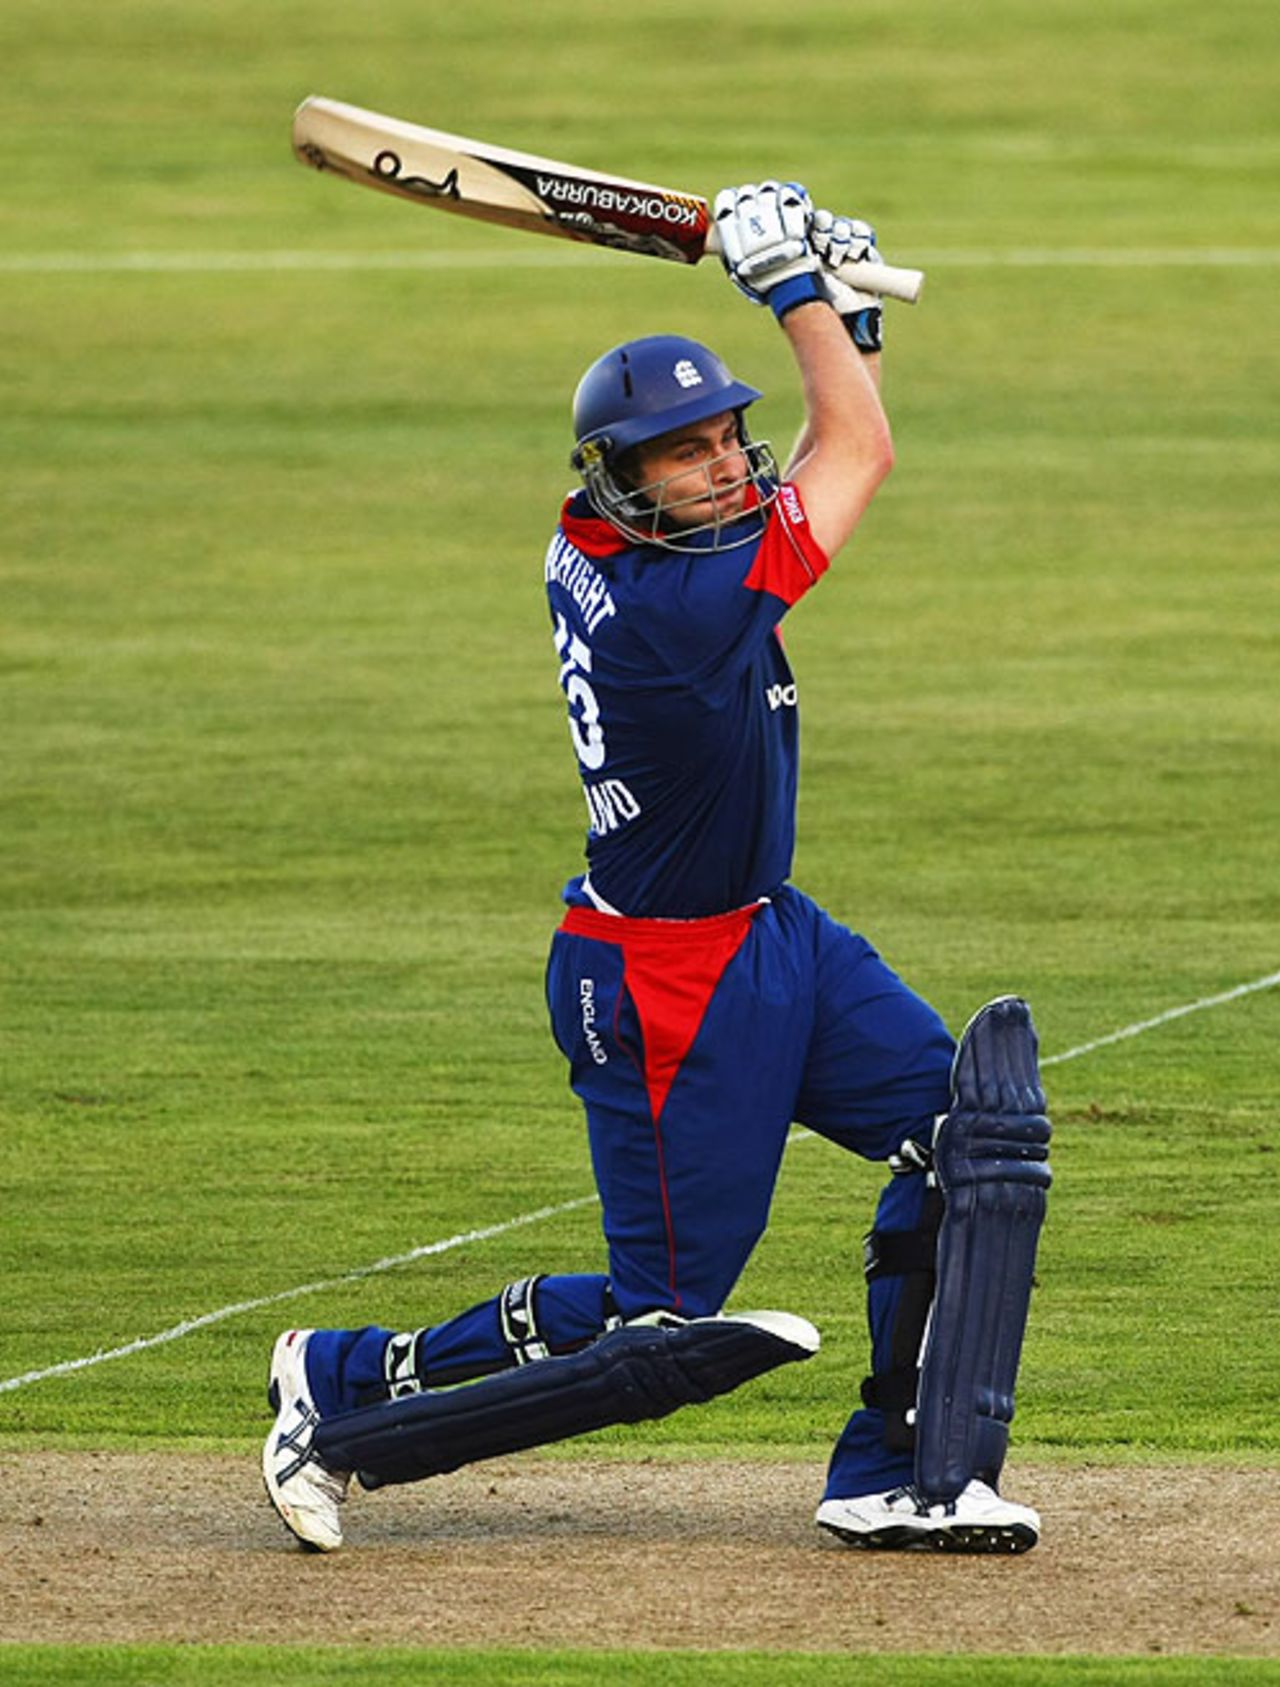 Luke Wright drives through the covers, on his way to 30 from 19 balls, New Zealand v England, 2nd Twenty20, Christchurch, February 7, 2008